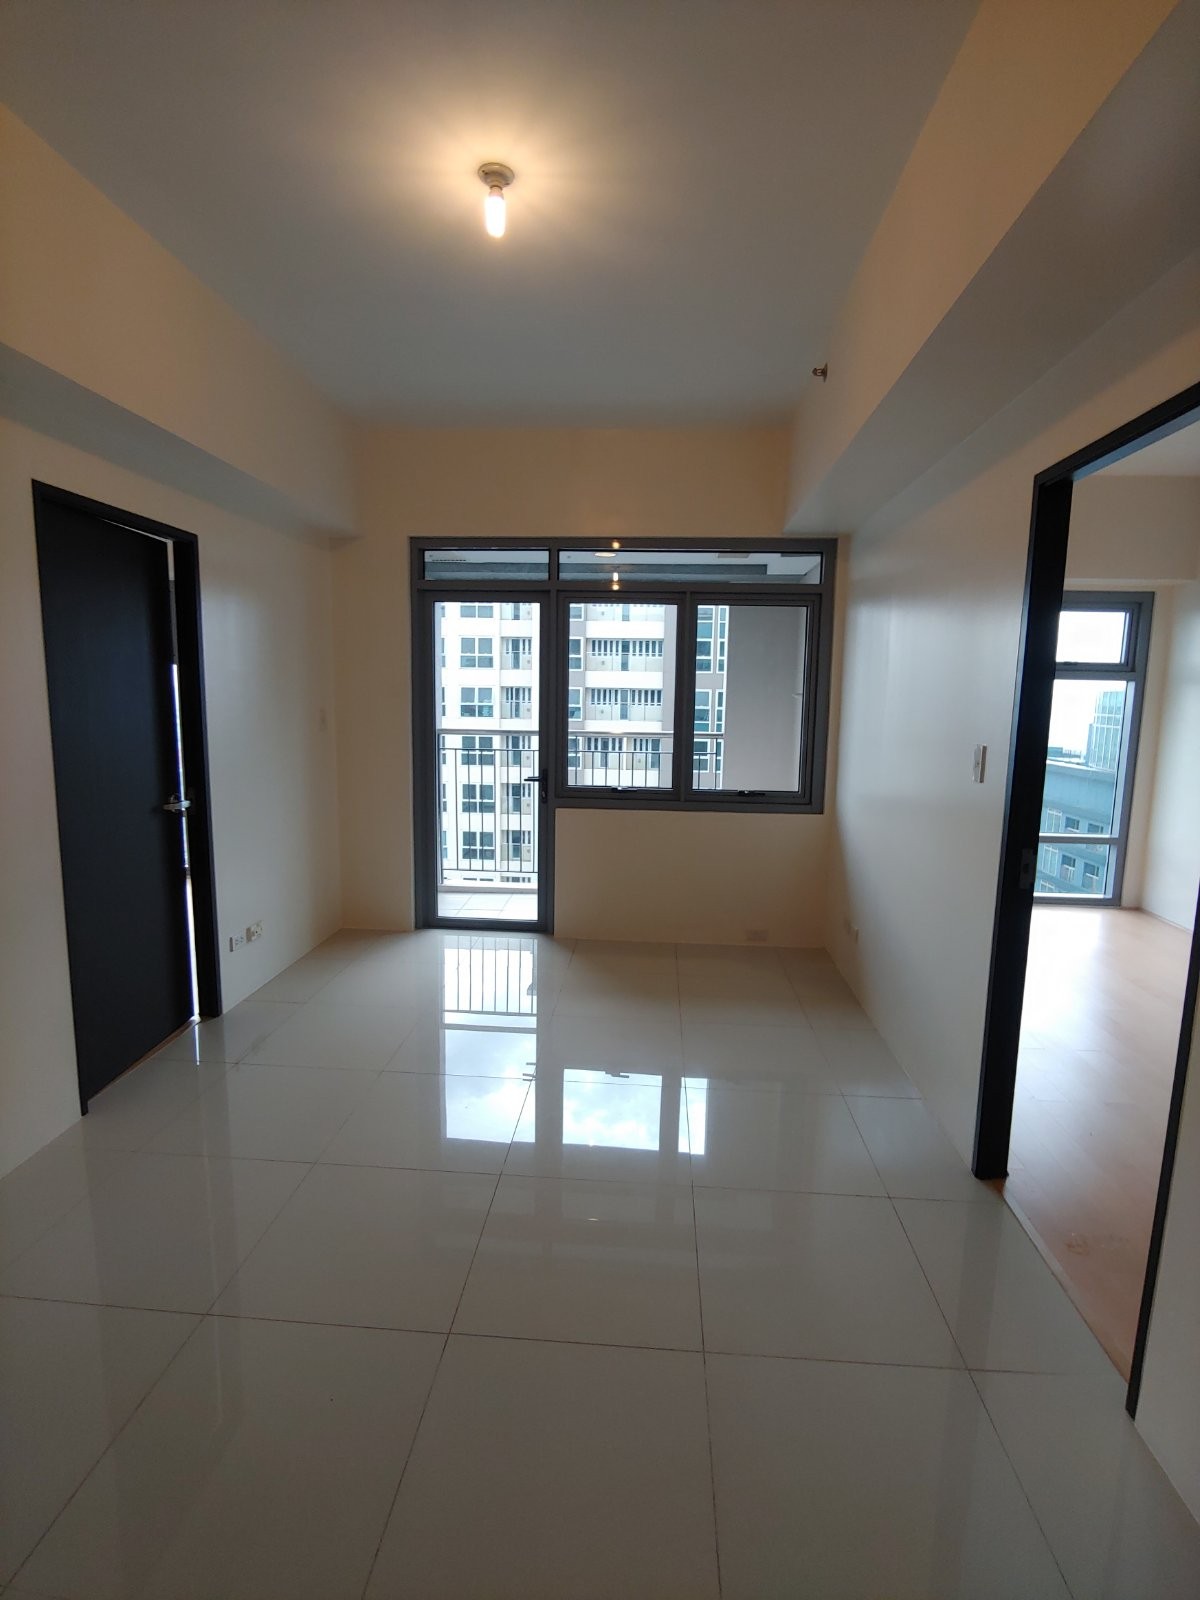 2 Bedroom Condominium Unit For Sale at central parkwest